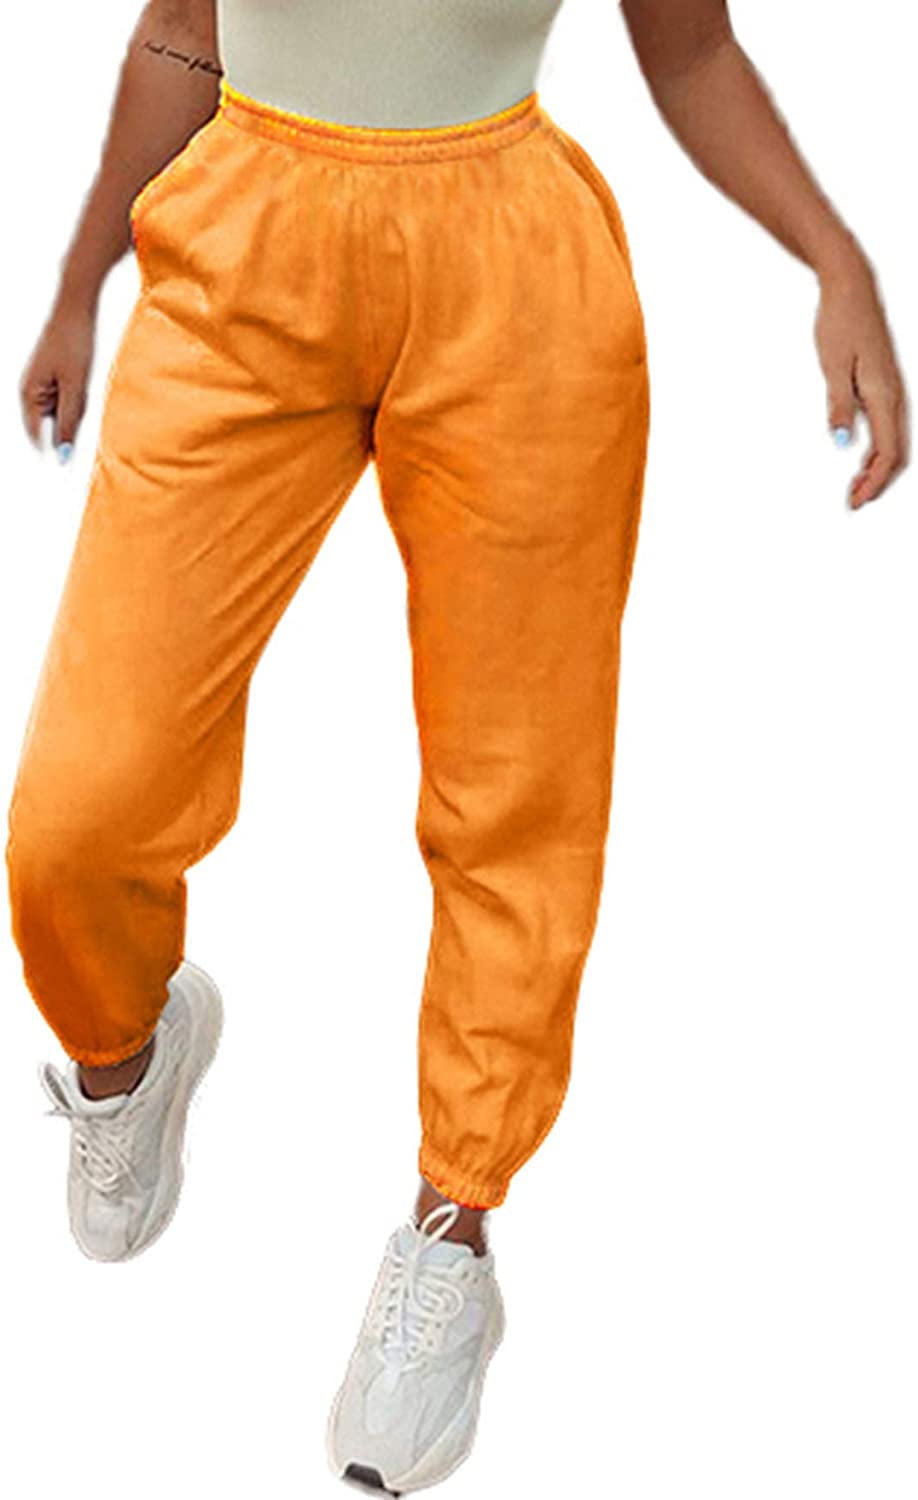 wybzd Women Casual Jogger Thick Sweatpants Cotton High Waist Workout Pants  Cinch Bottom Trousers with Pockets Orange L 